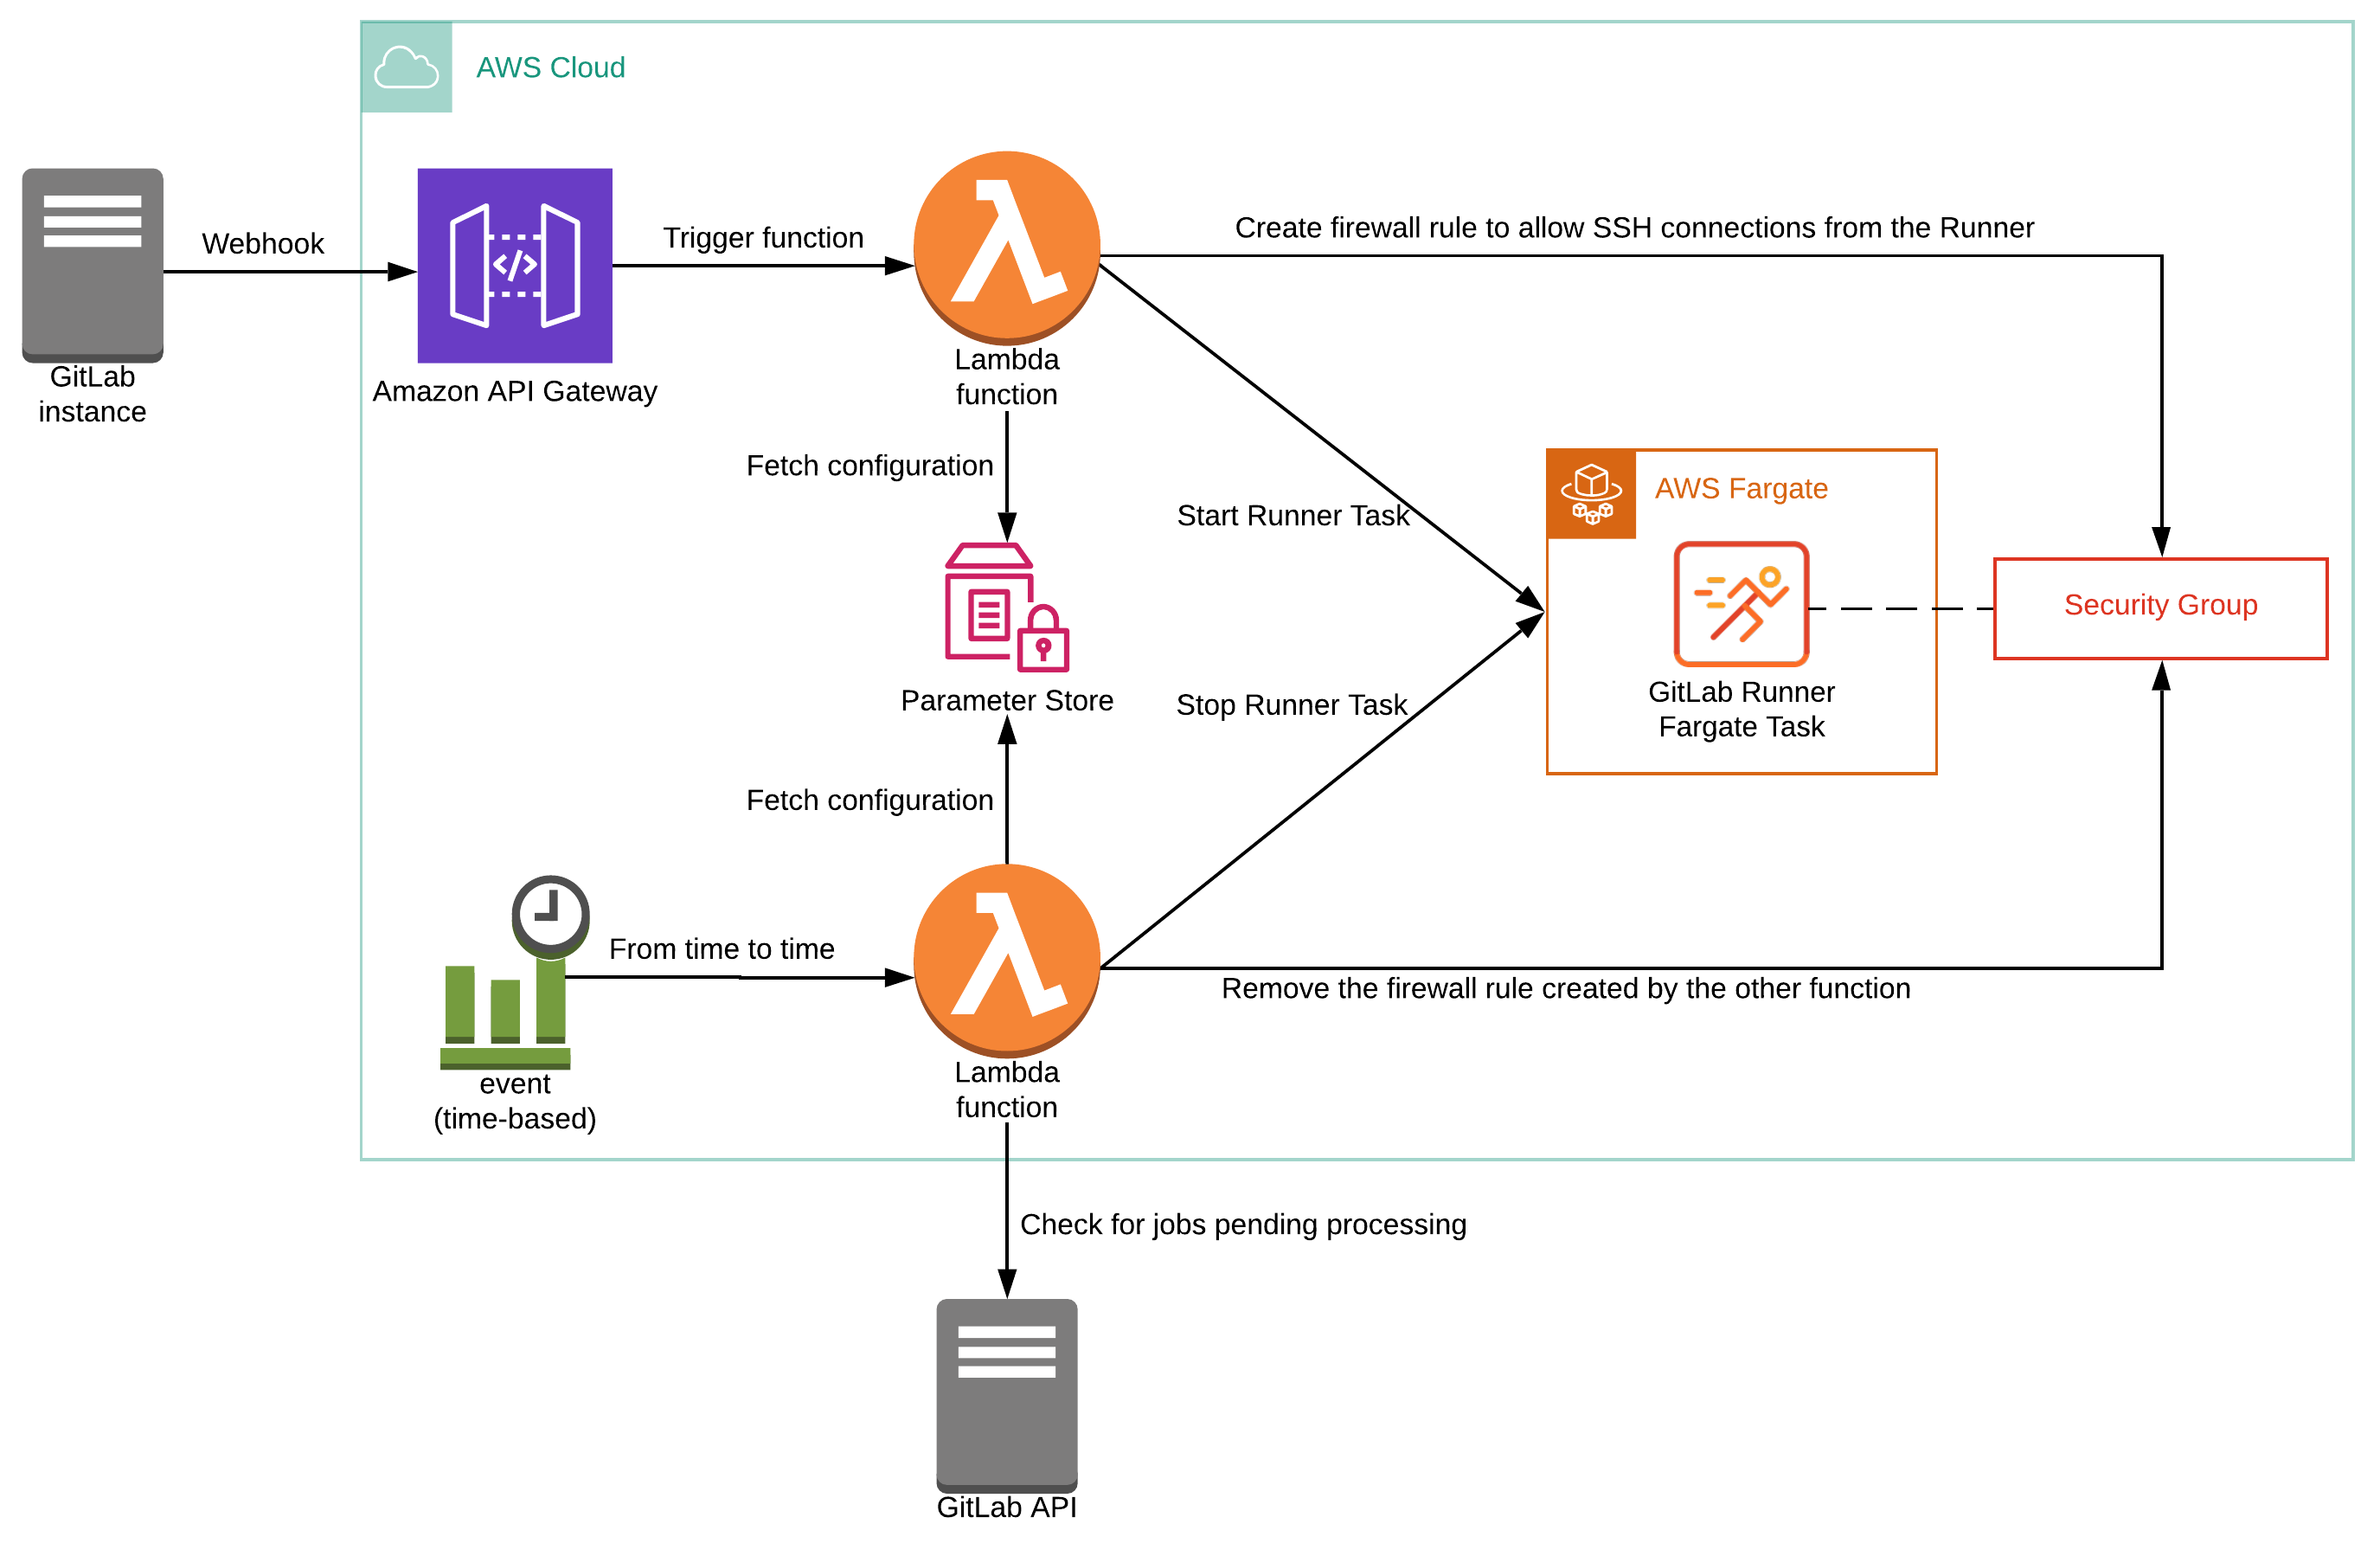 Image showing all components involved in the solution: for example the Lambda functions and the Runner Fargate Task.